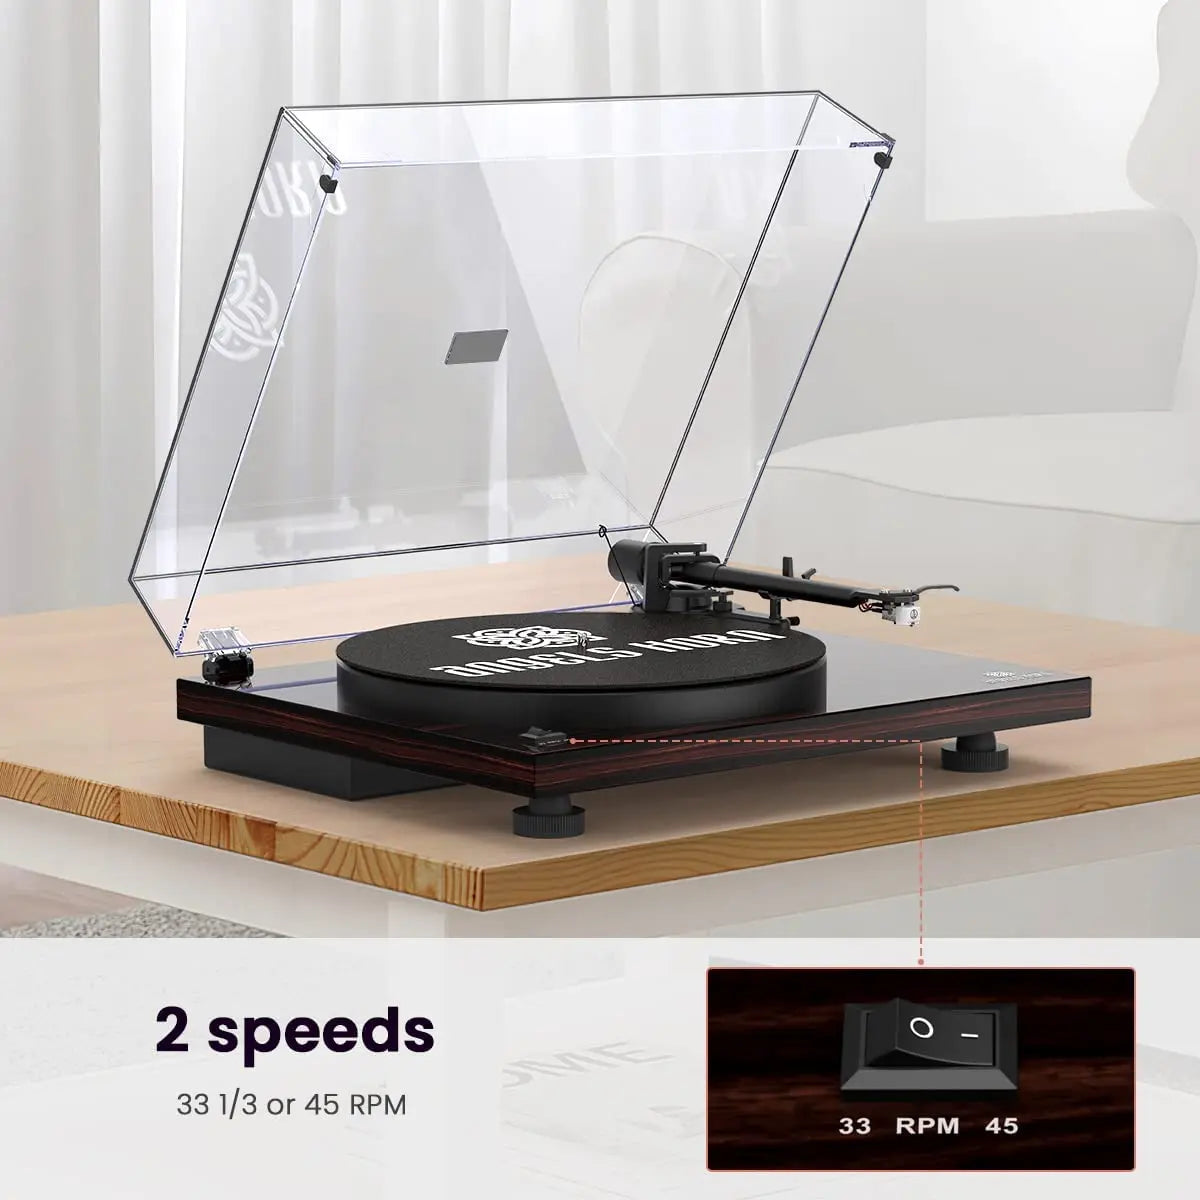  ANGELS HORN Turntable, Vinyl Record Player, Bluetooth Built-in Phono Preamp Belt Drive 2-Speed, Adjustable Counterweight, AT-3600L (Bluetooth Version)